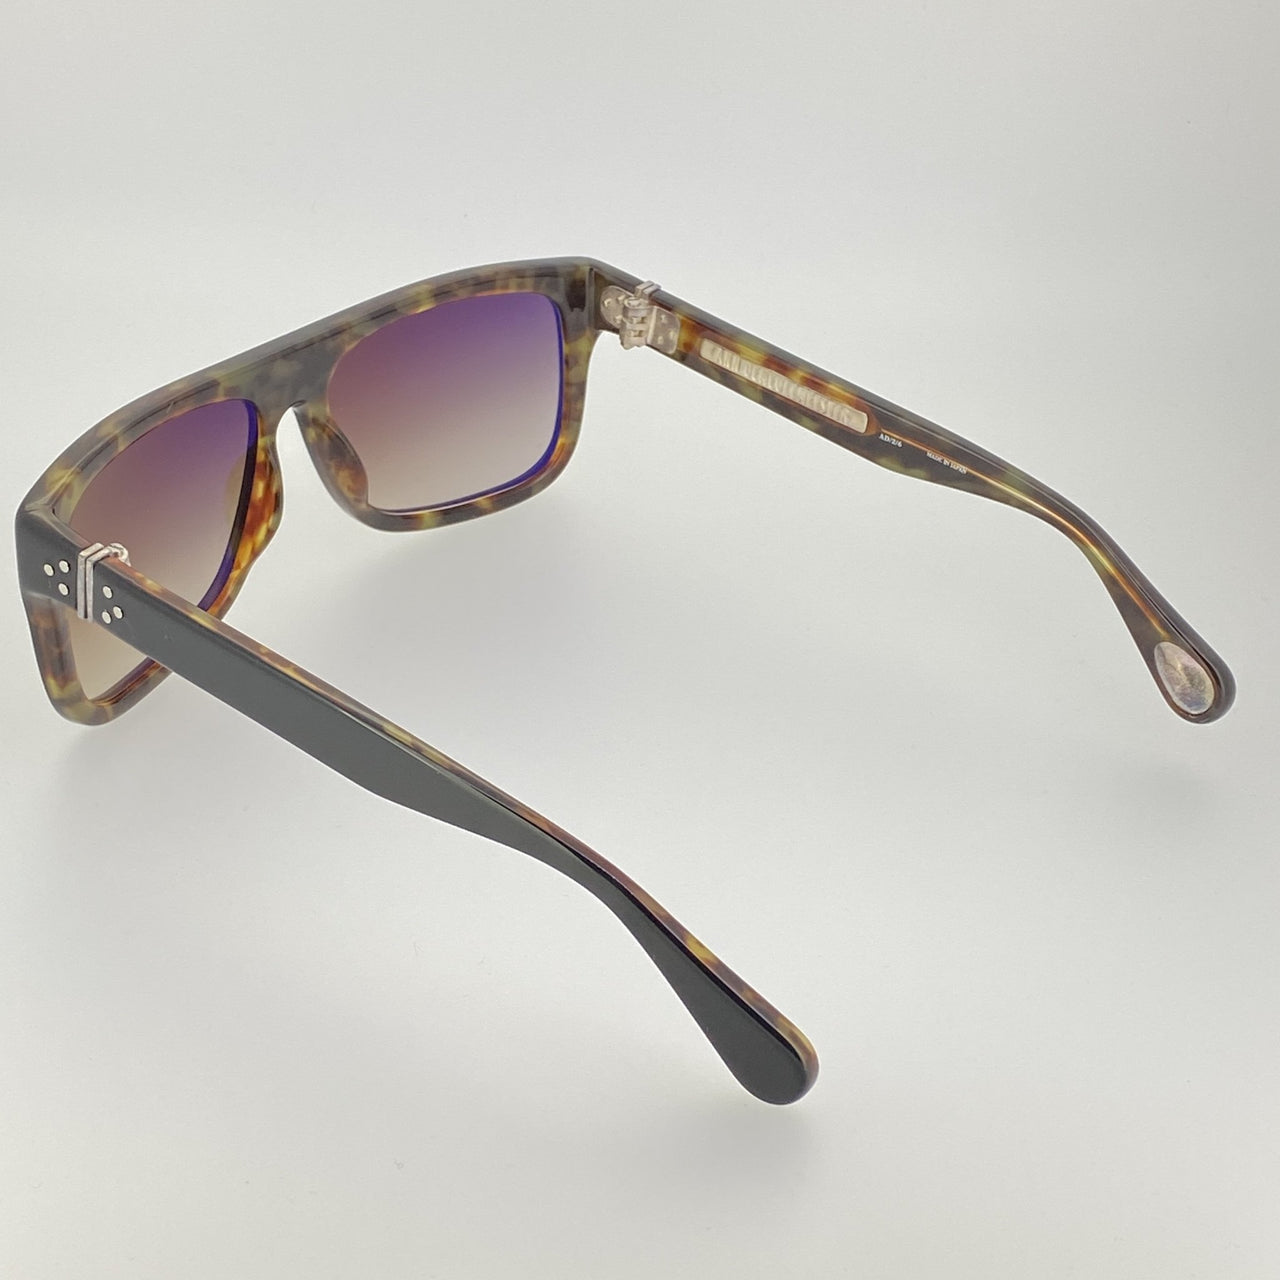 Ann Demeulemeester Sunglasses Flat Top Black Tortoise Shell 925 Silver with Brown Lenses AD2C6SUN - Watches & Crystals